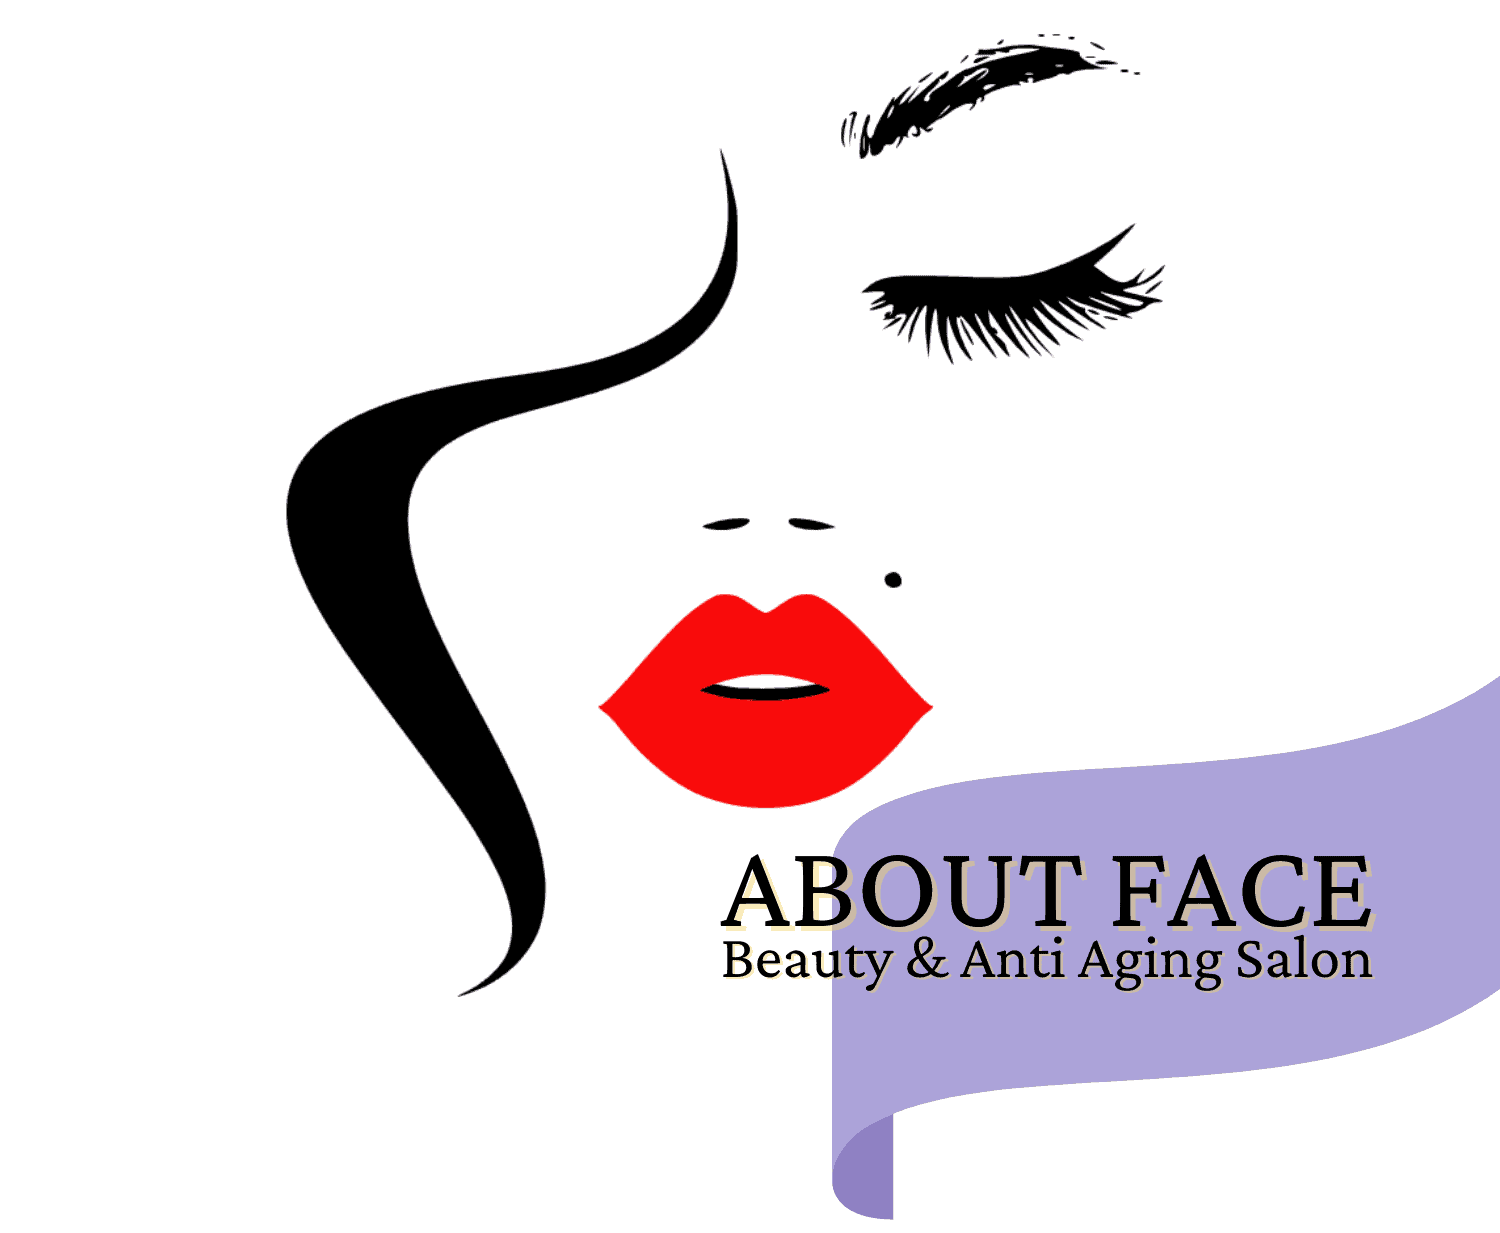 About Face Beauty & Anti Aging Salon